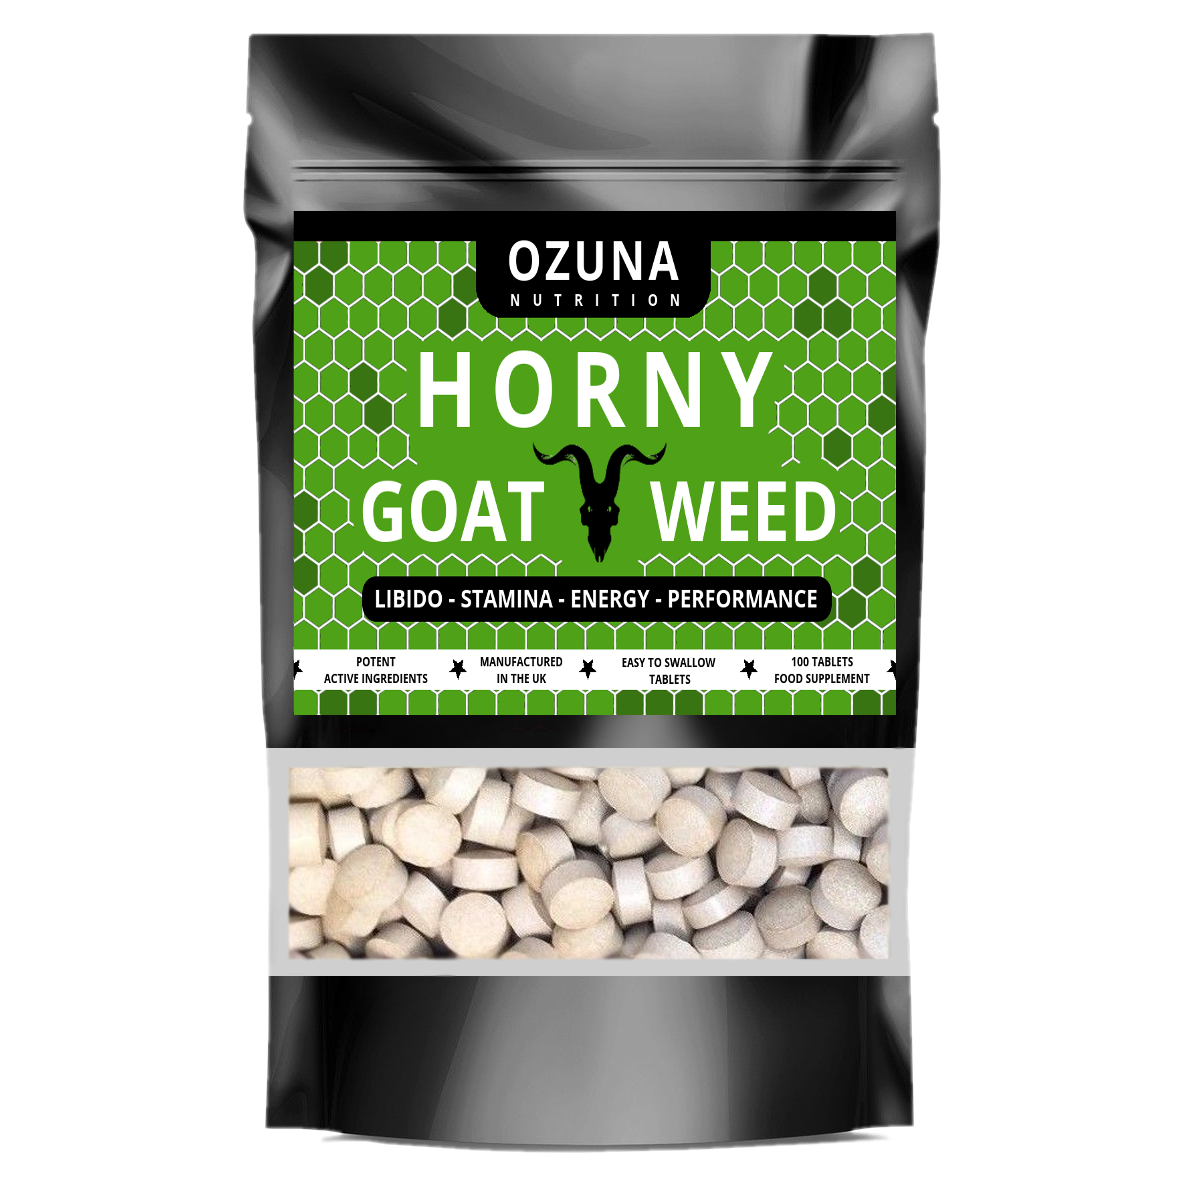 Horny Goat Weed Tablets